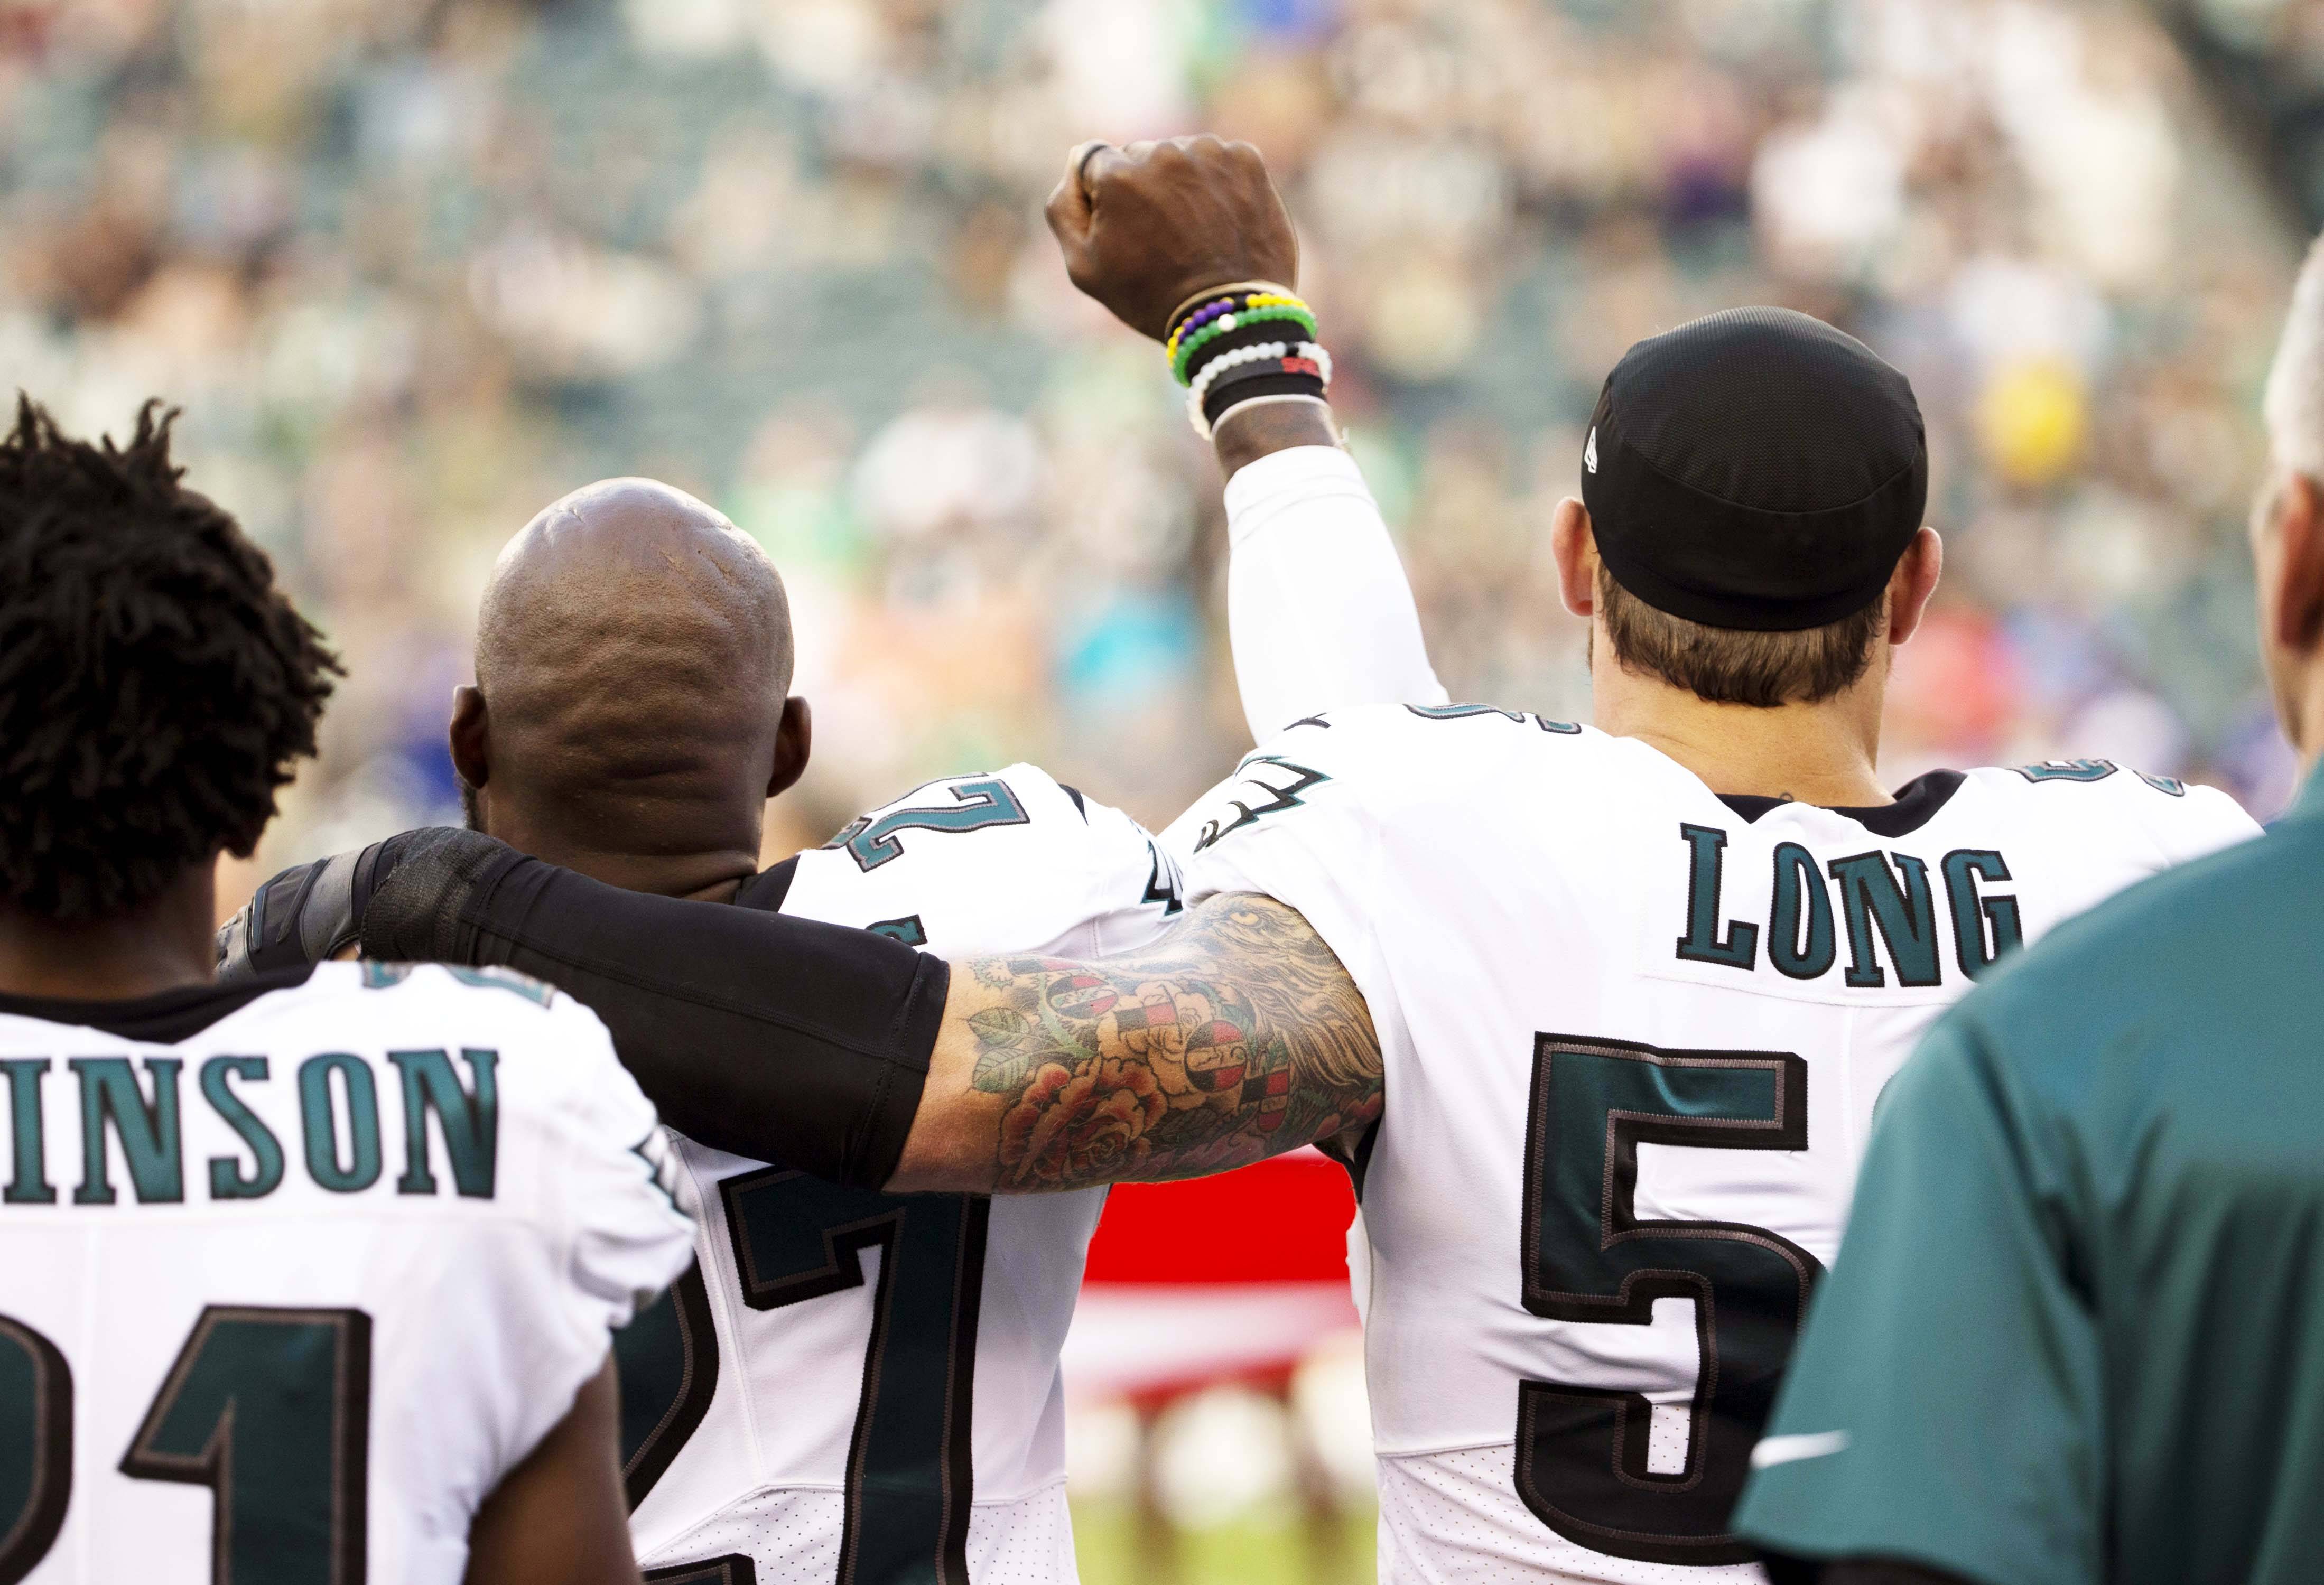 People Applauded White Eagles Player Chris Long For Supporting